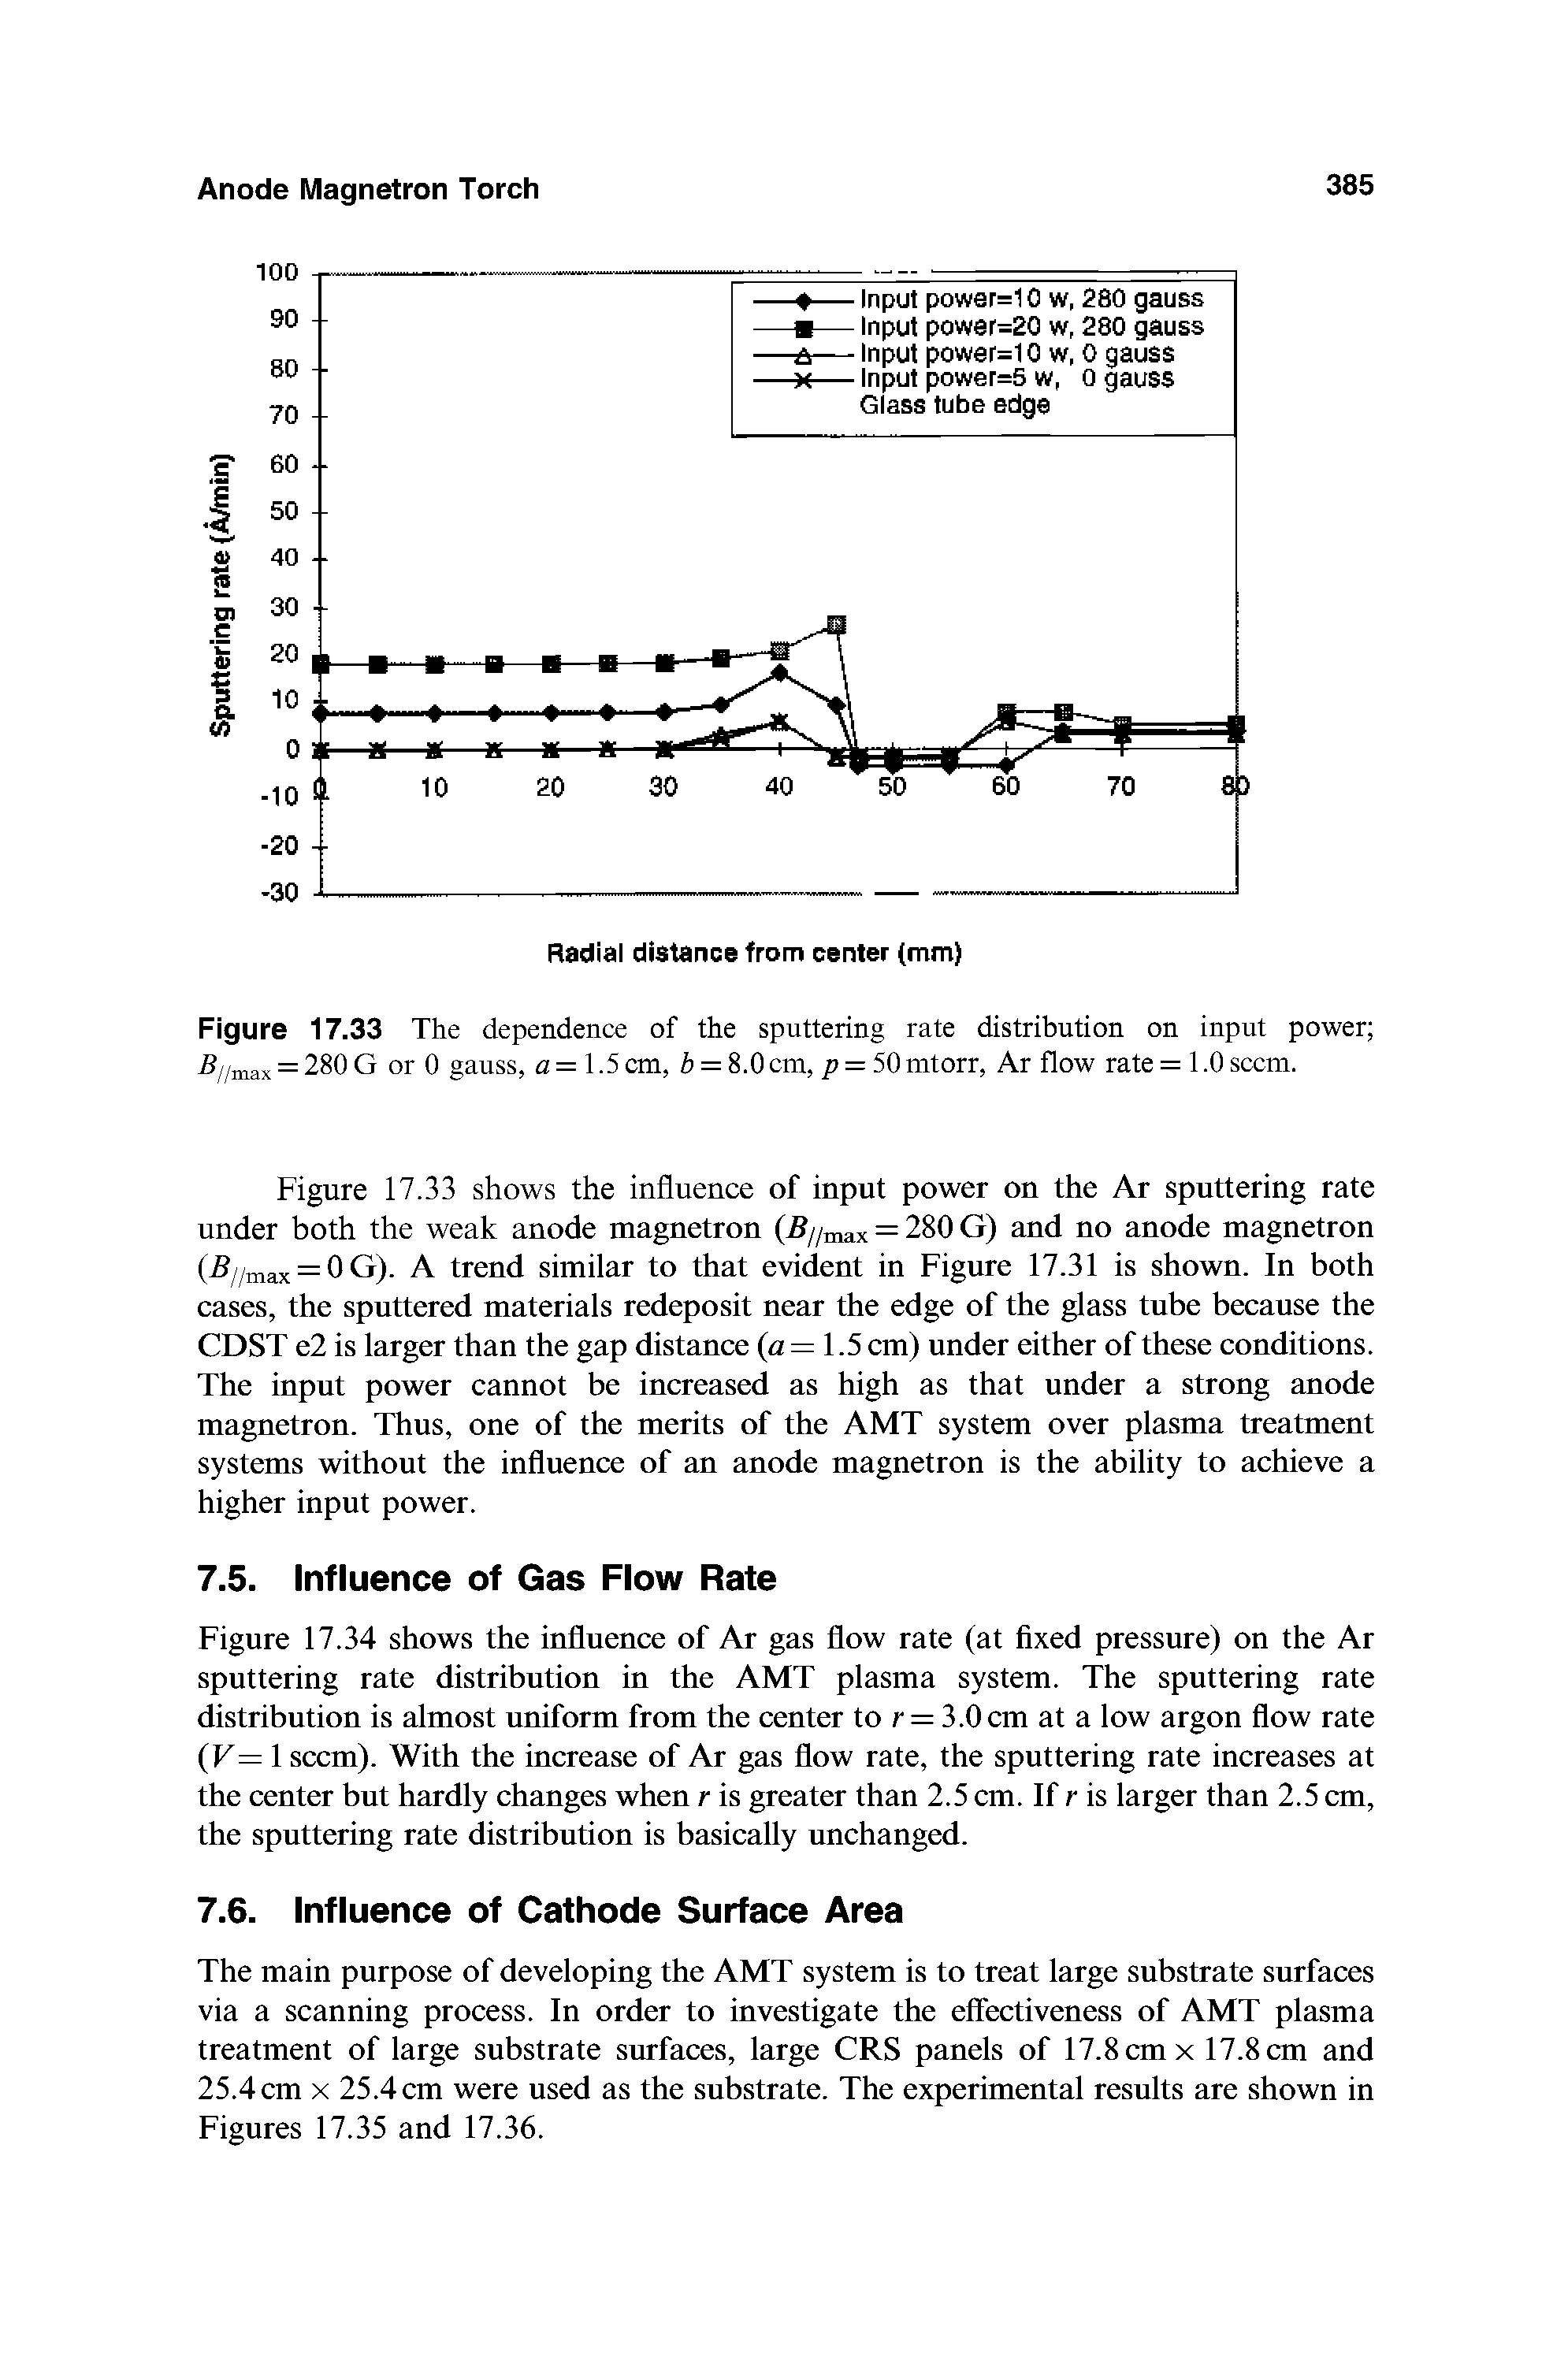 Figure 17.33 The dependence of the sputtering rate distribution on input power = 280 G or 0 gauss, a = 1.5 cm, b = 8.0cm, p = 5Qmtorr, Ar flow rate = 1.0 seem.